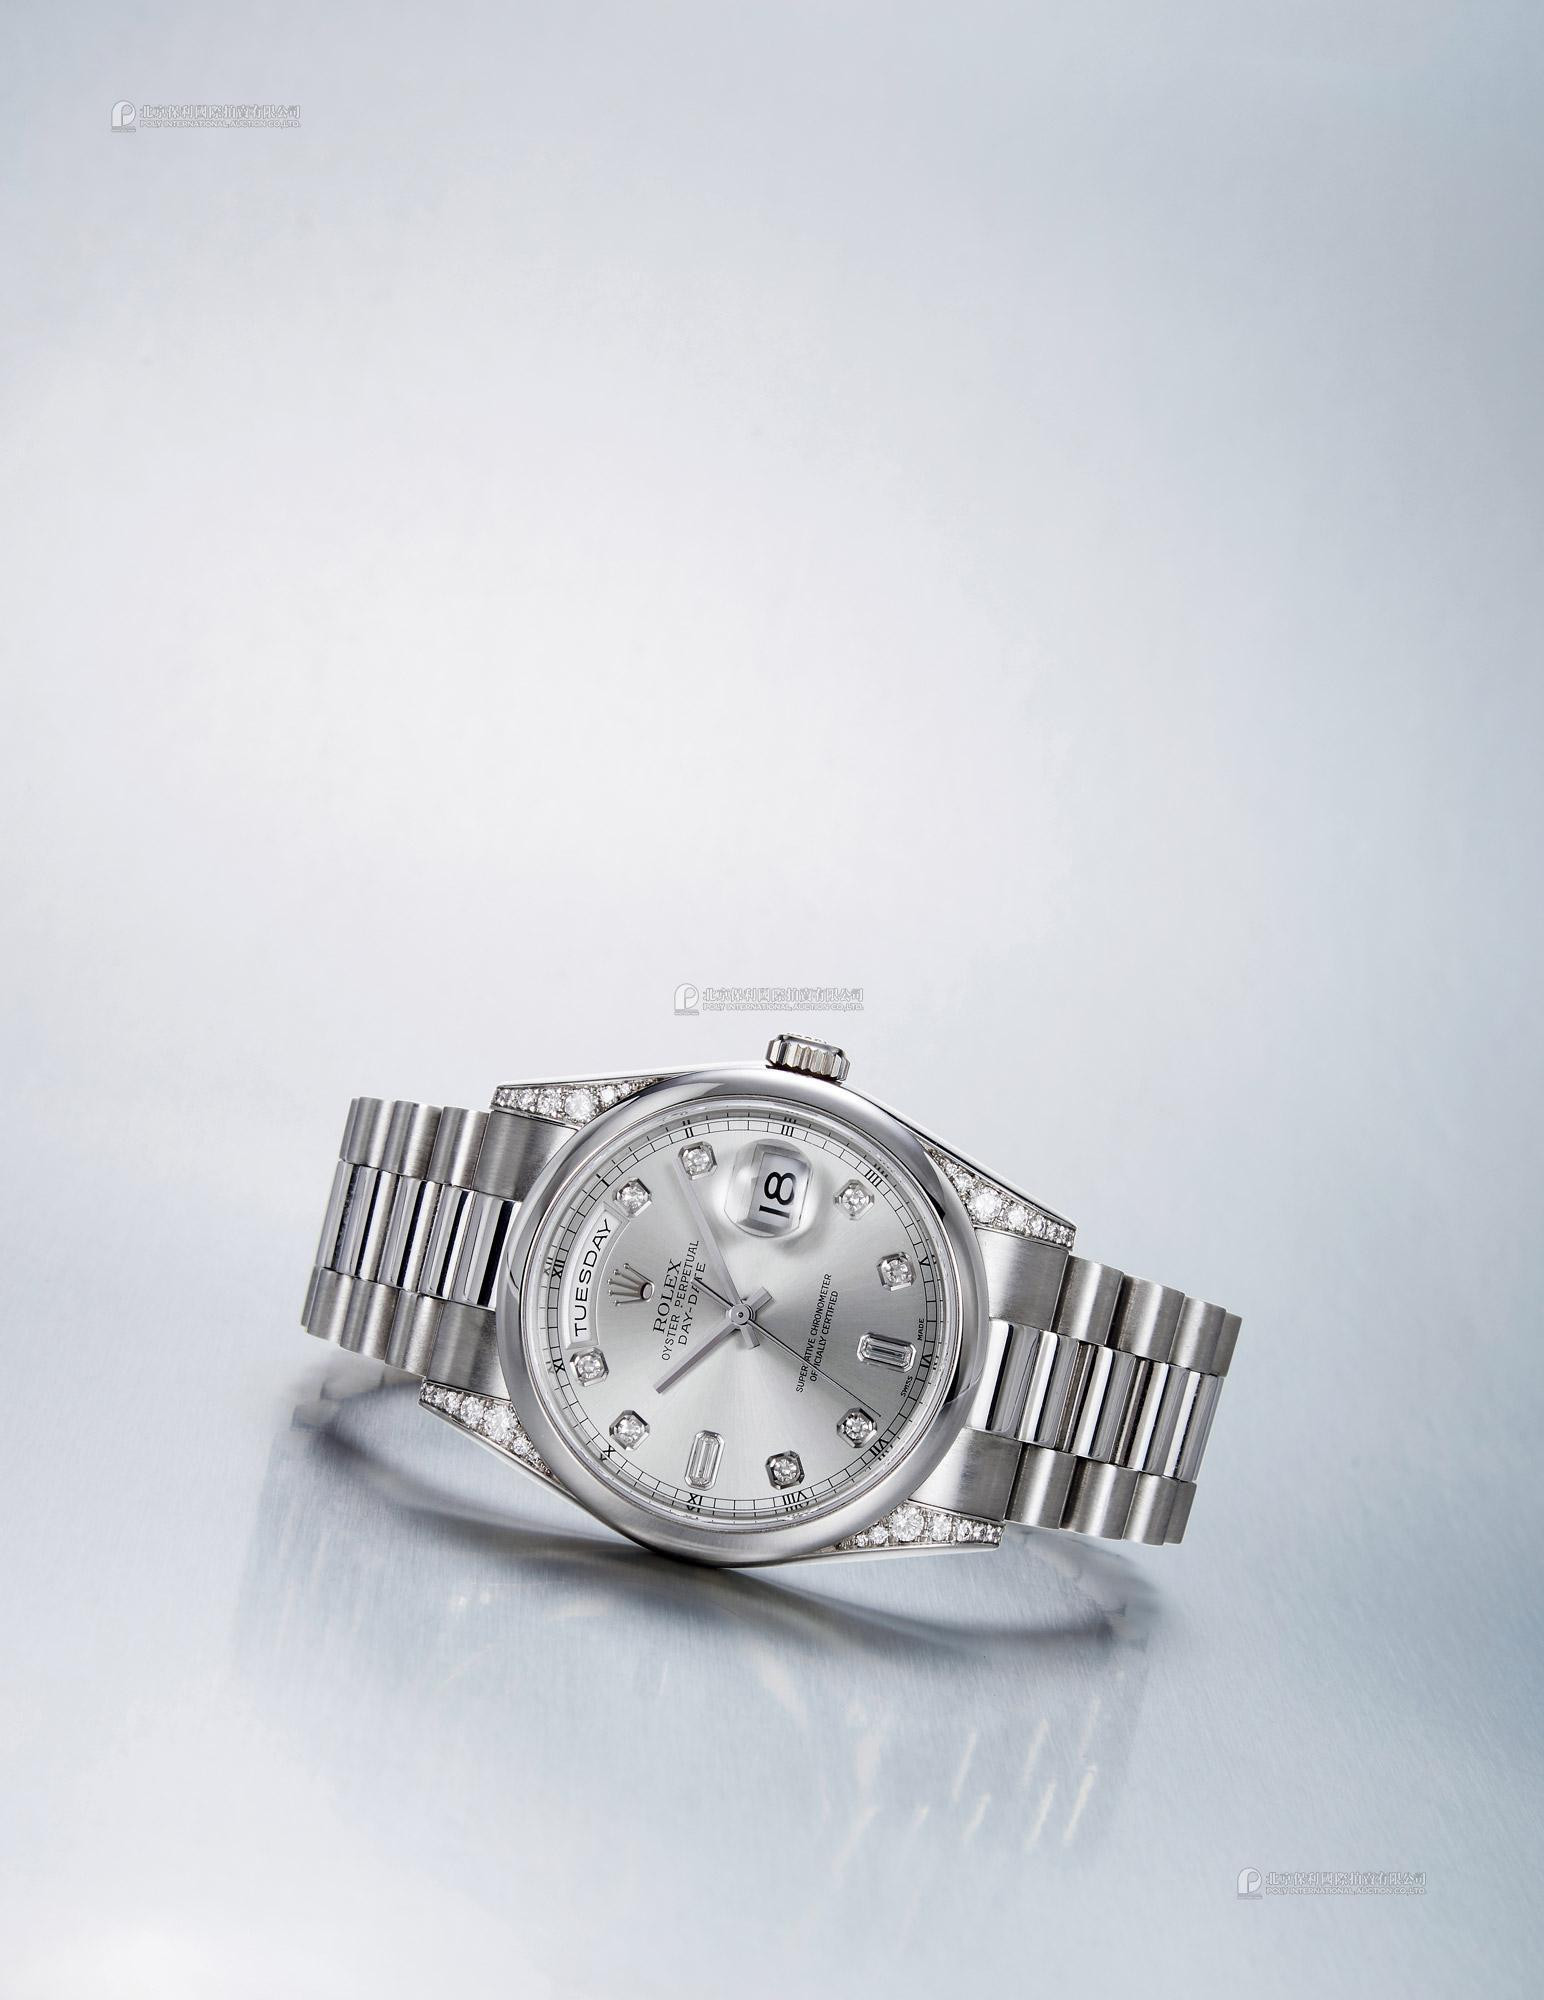 ROLEX A PLATINUM AND DIAMOND-SET AUTOMATIC WRISTWATCH WITH WEEK AND DATE INDICATION